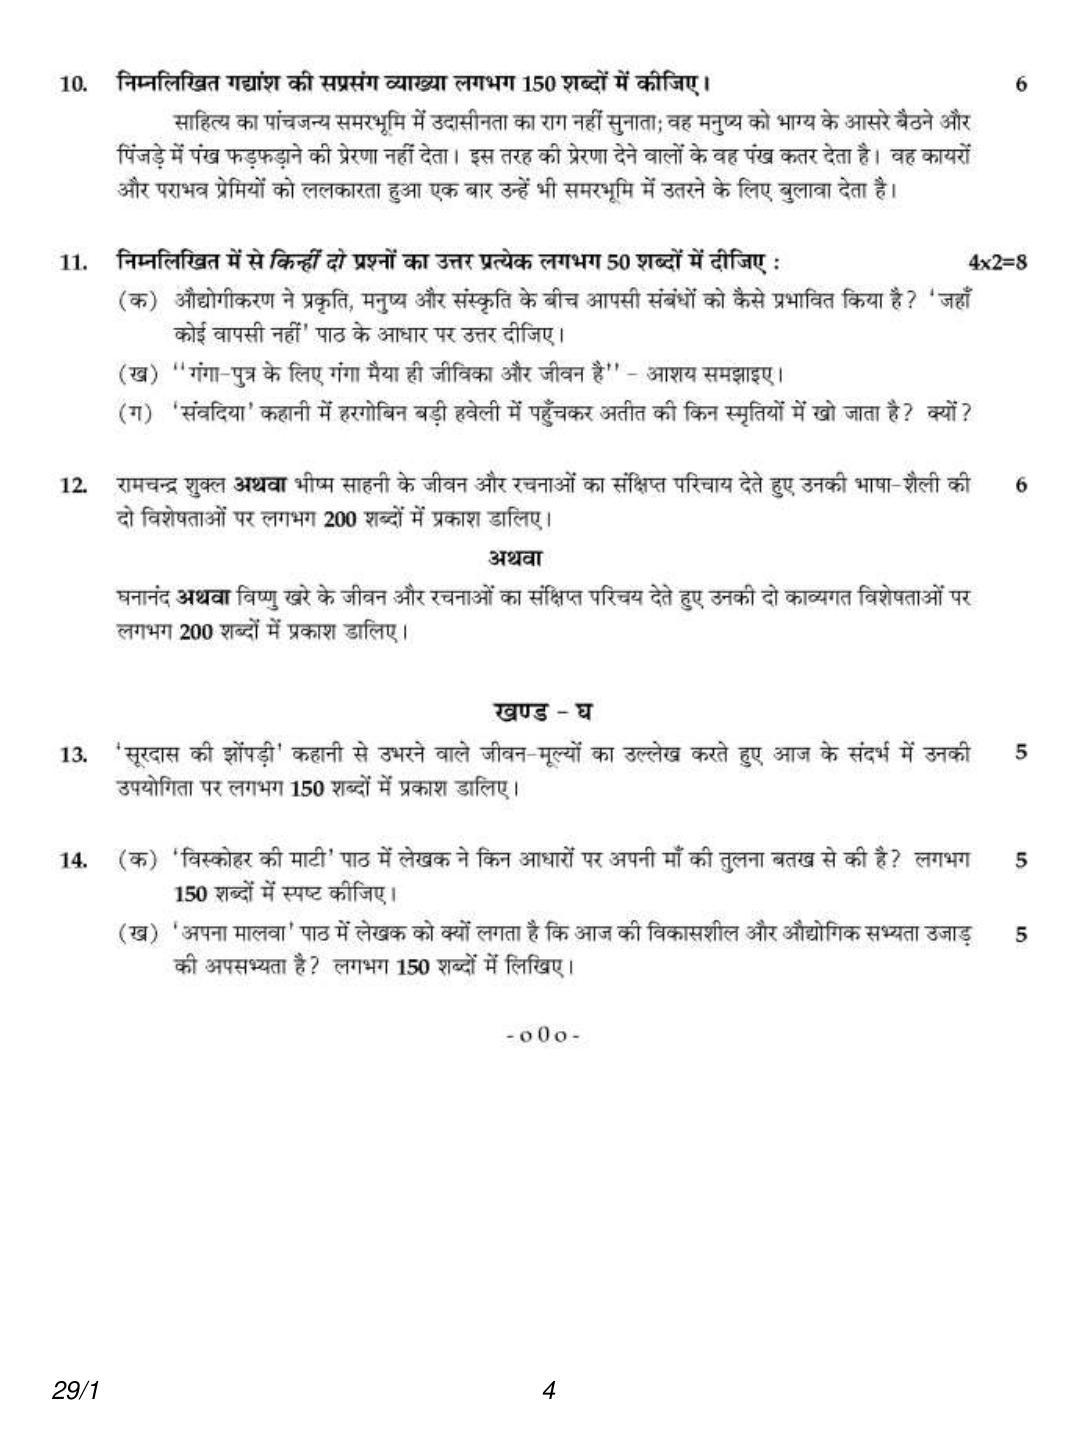 CBSE Class 12 29-1 Hindi Elective 2018 Question Paper - Page 4